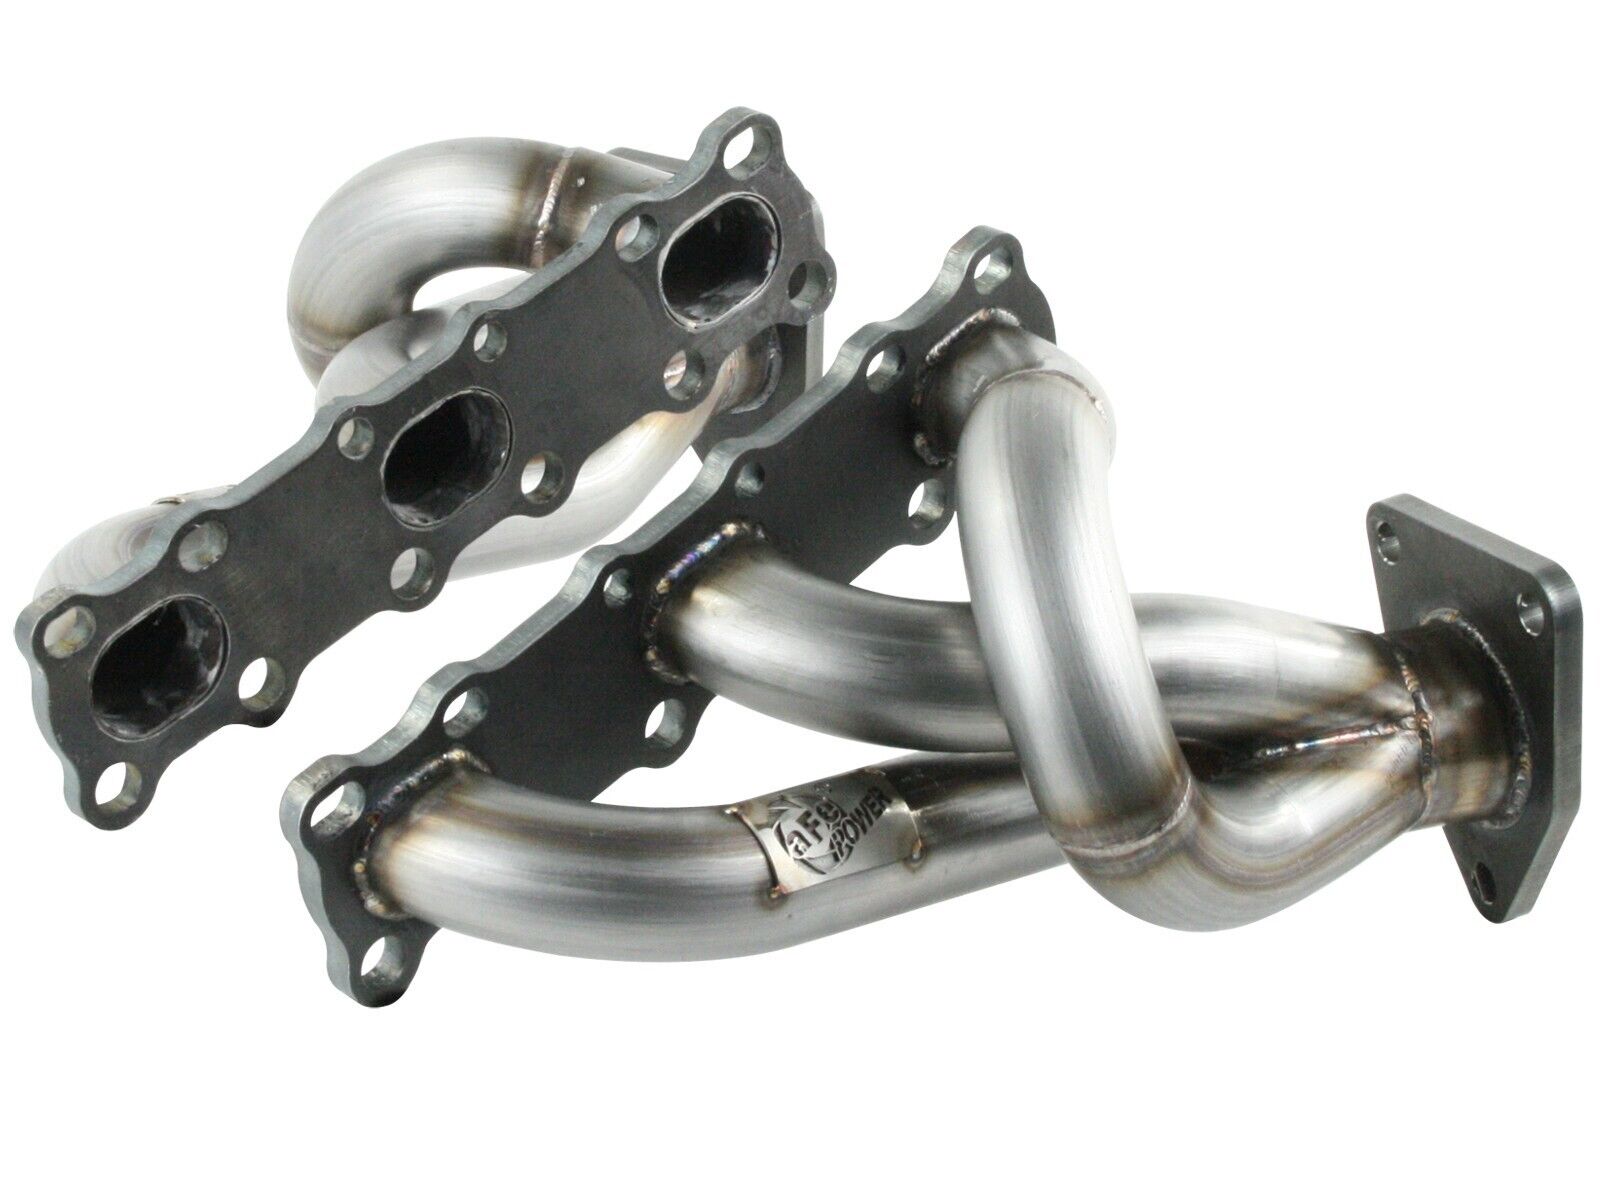 aFe 48-46101 Twisted Steel Exhaust Headers for 05-19 Nissan Frontier/Xterra 4.0L